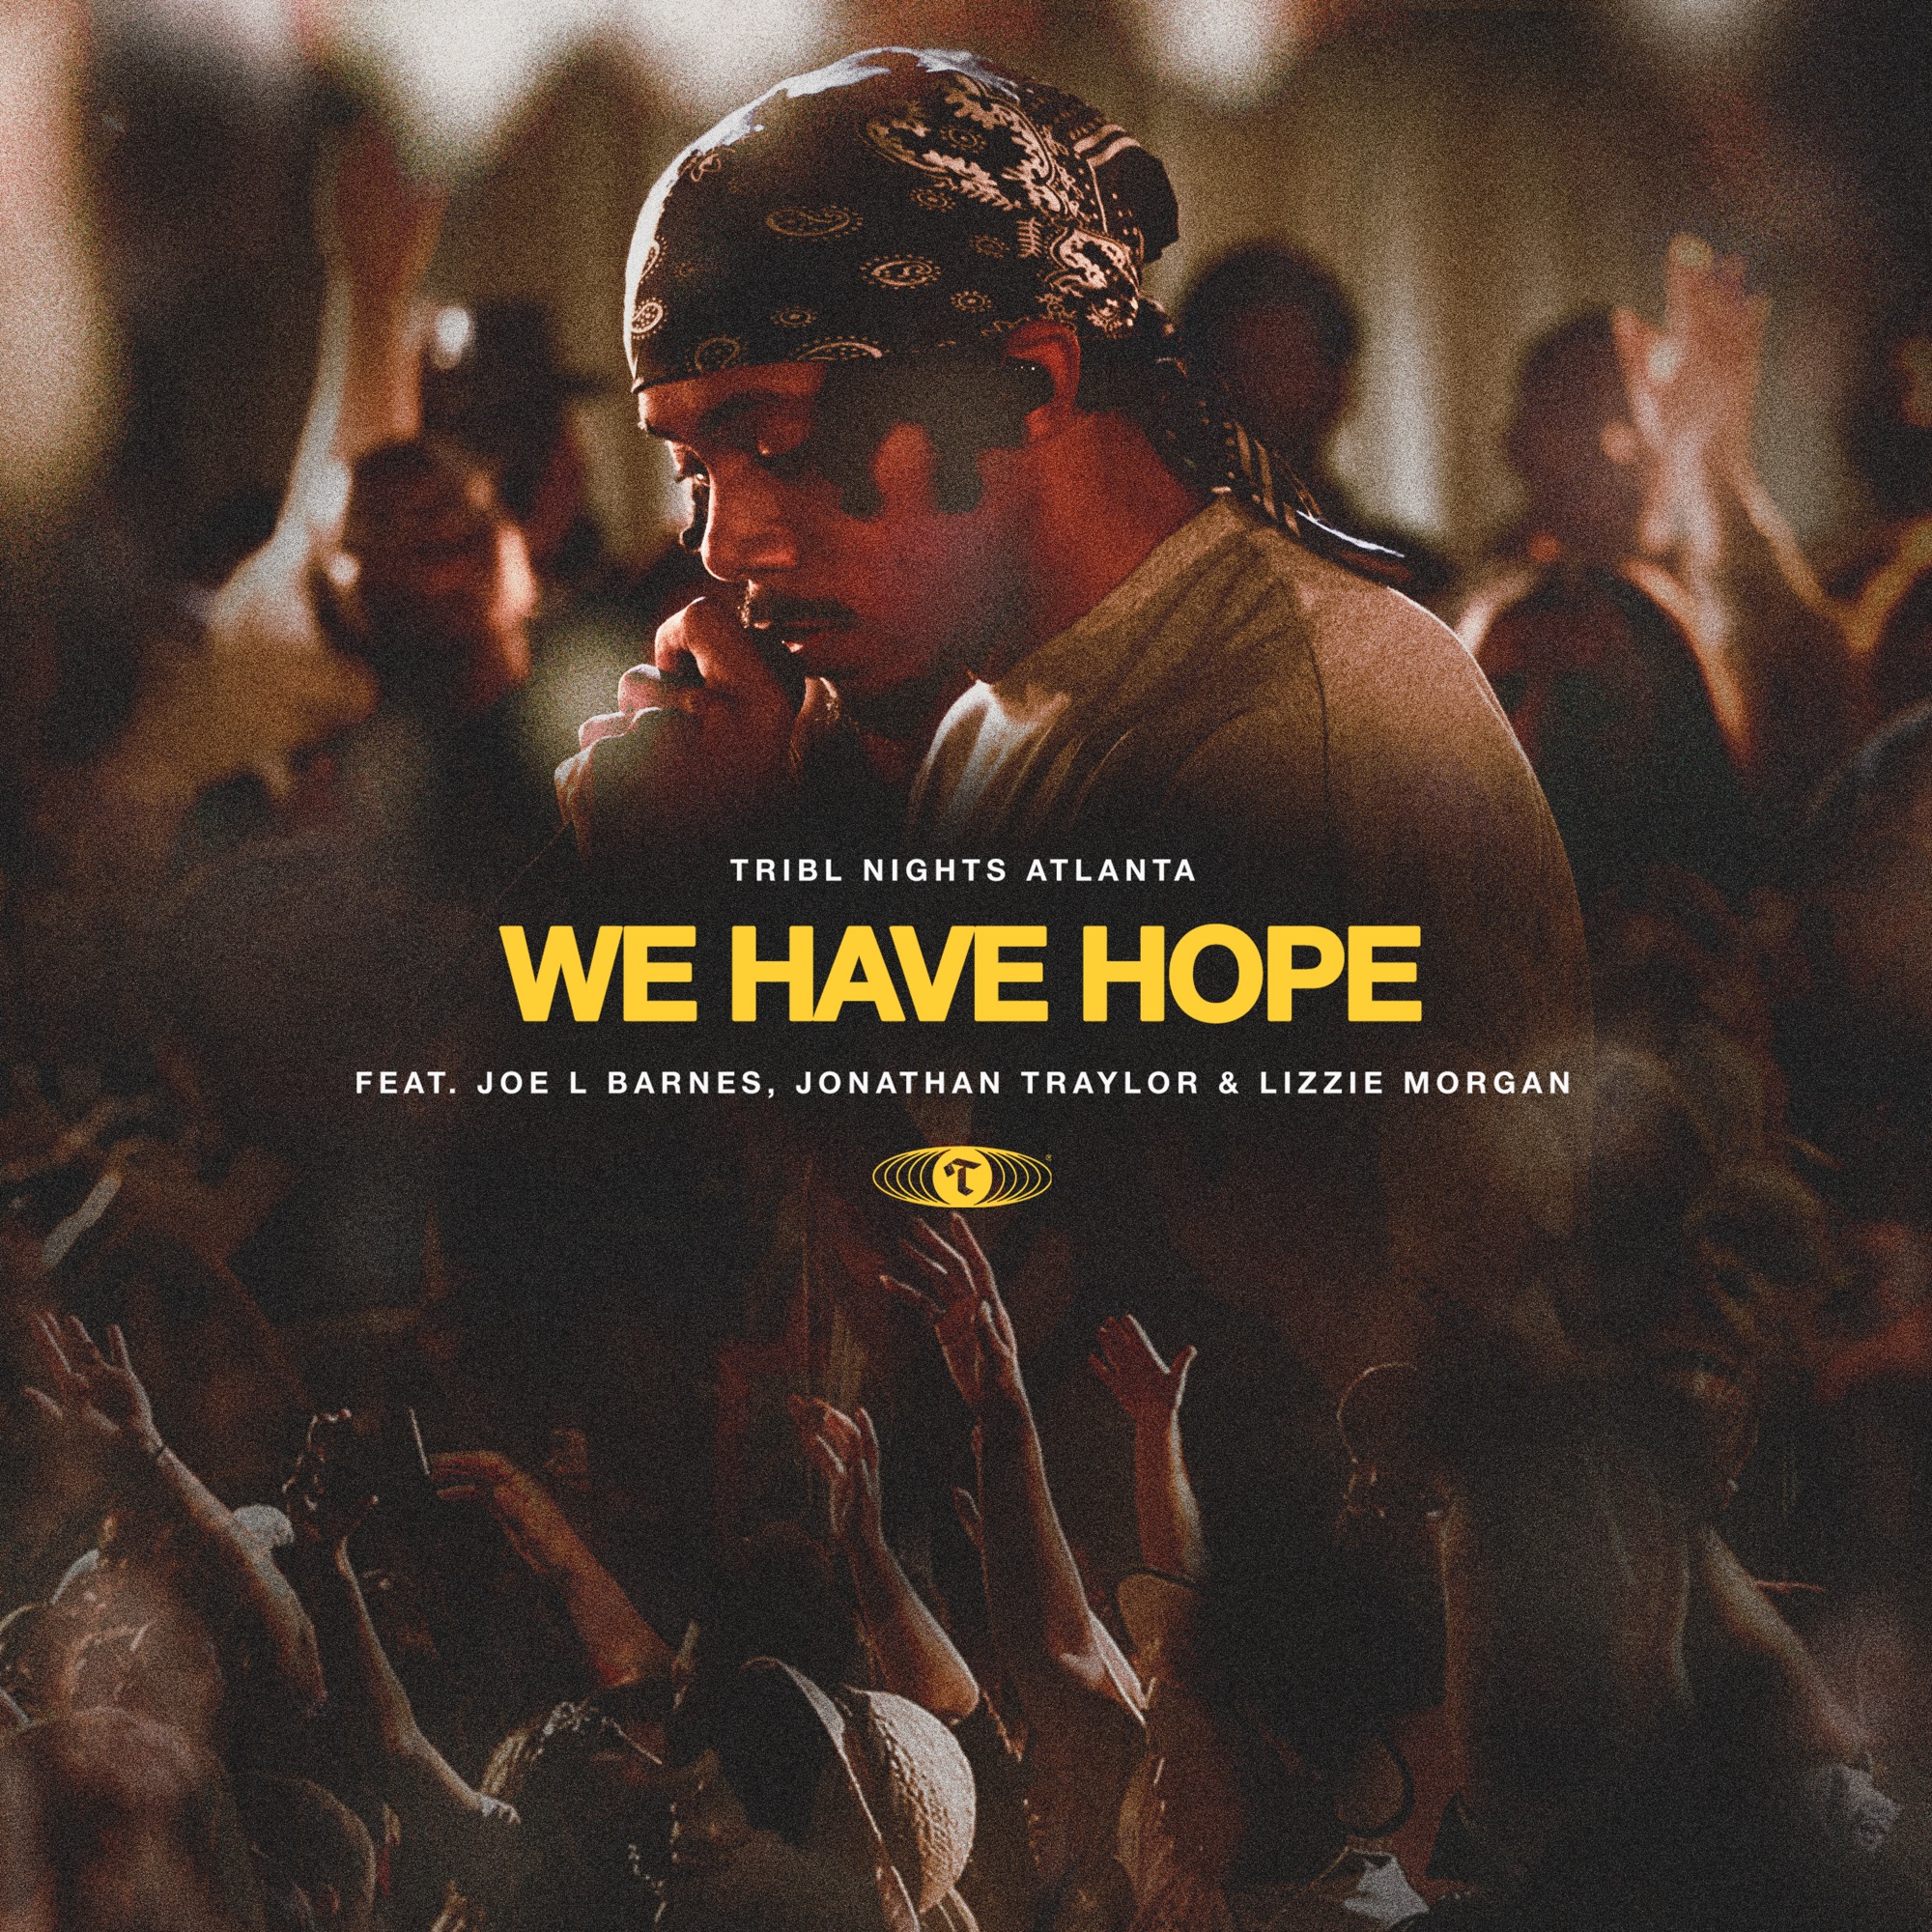 Art for We Have Hope (feat. Joe L Barnes, Jonathan Traylor & Lizzie Morgan) by Tribl